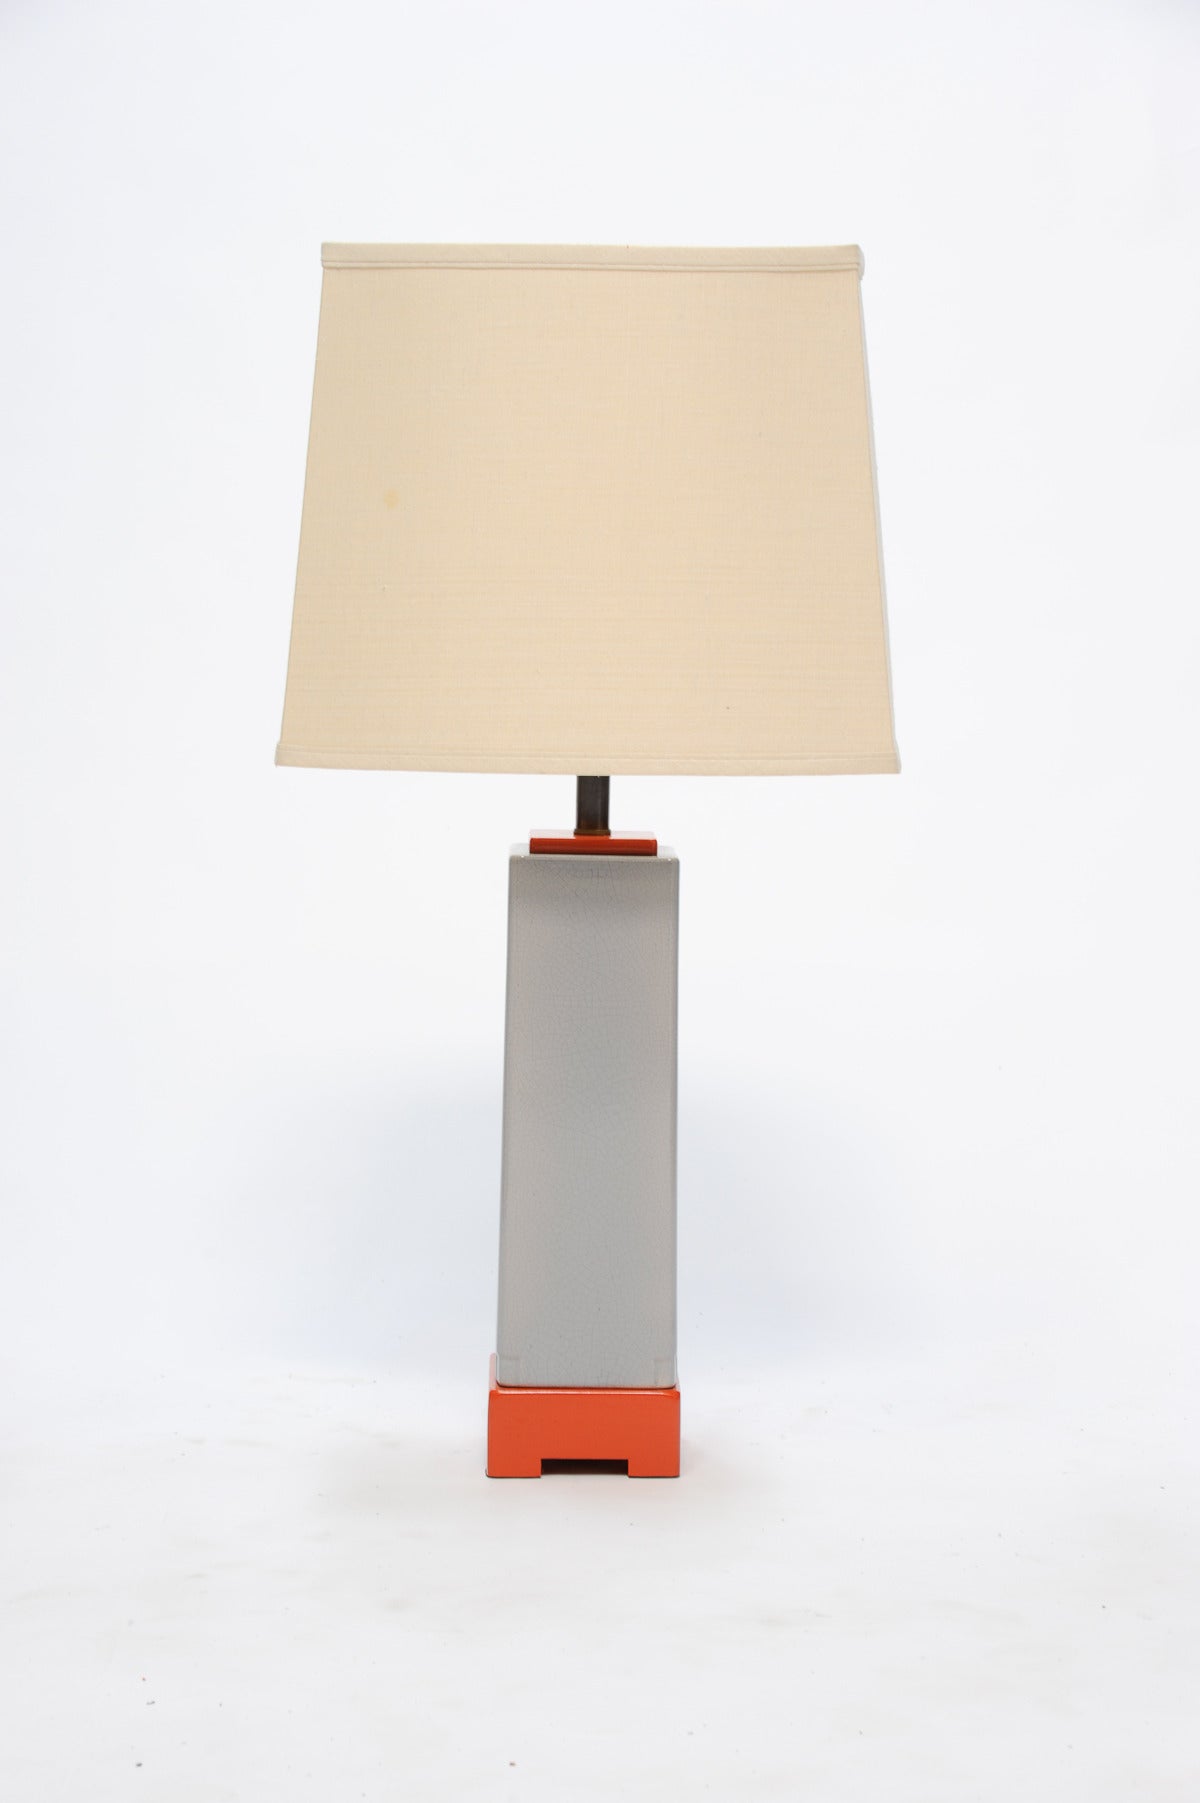 Using the Laszlo signature orange these lamps bring delight to any room. They are bold and playful. Height to 25